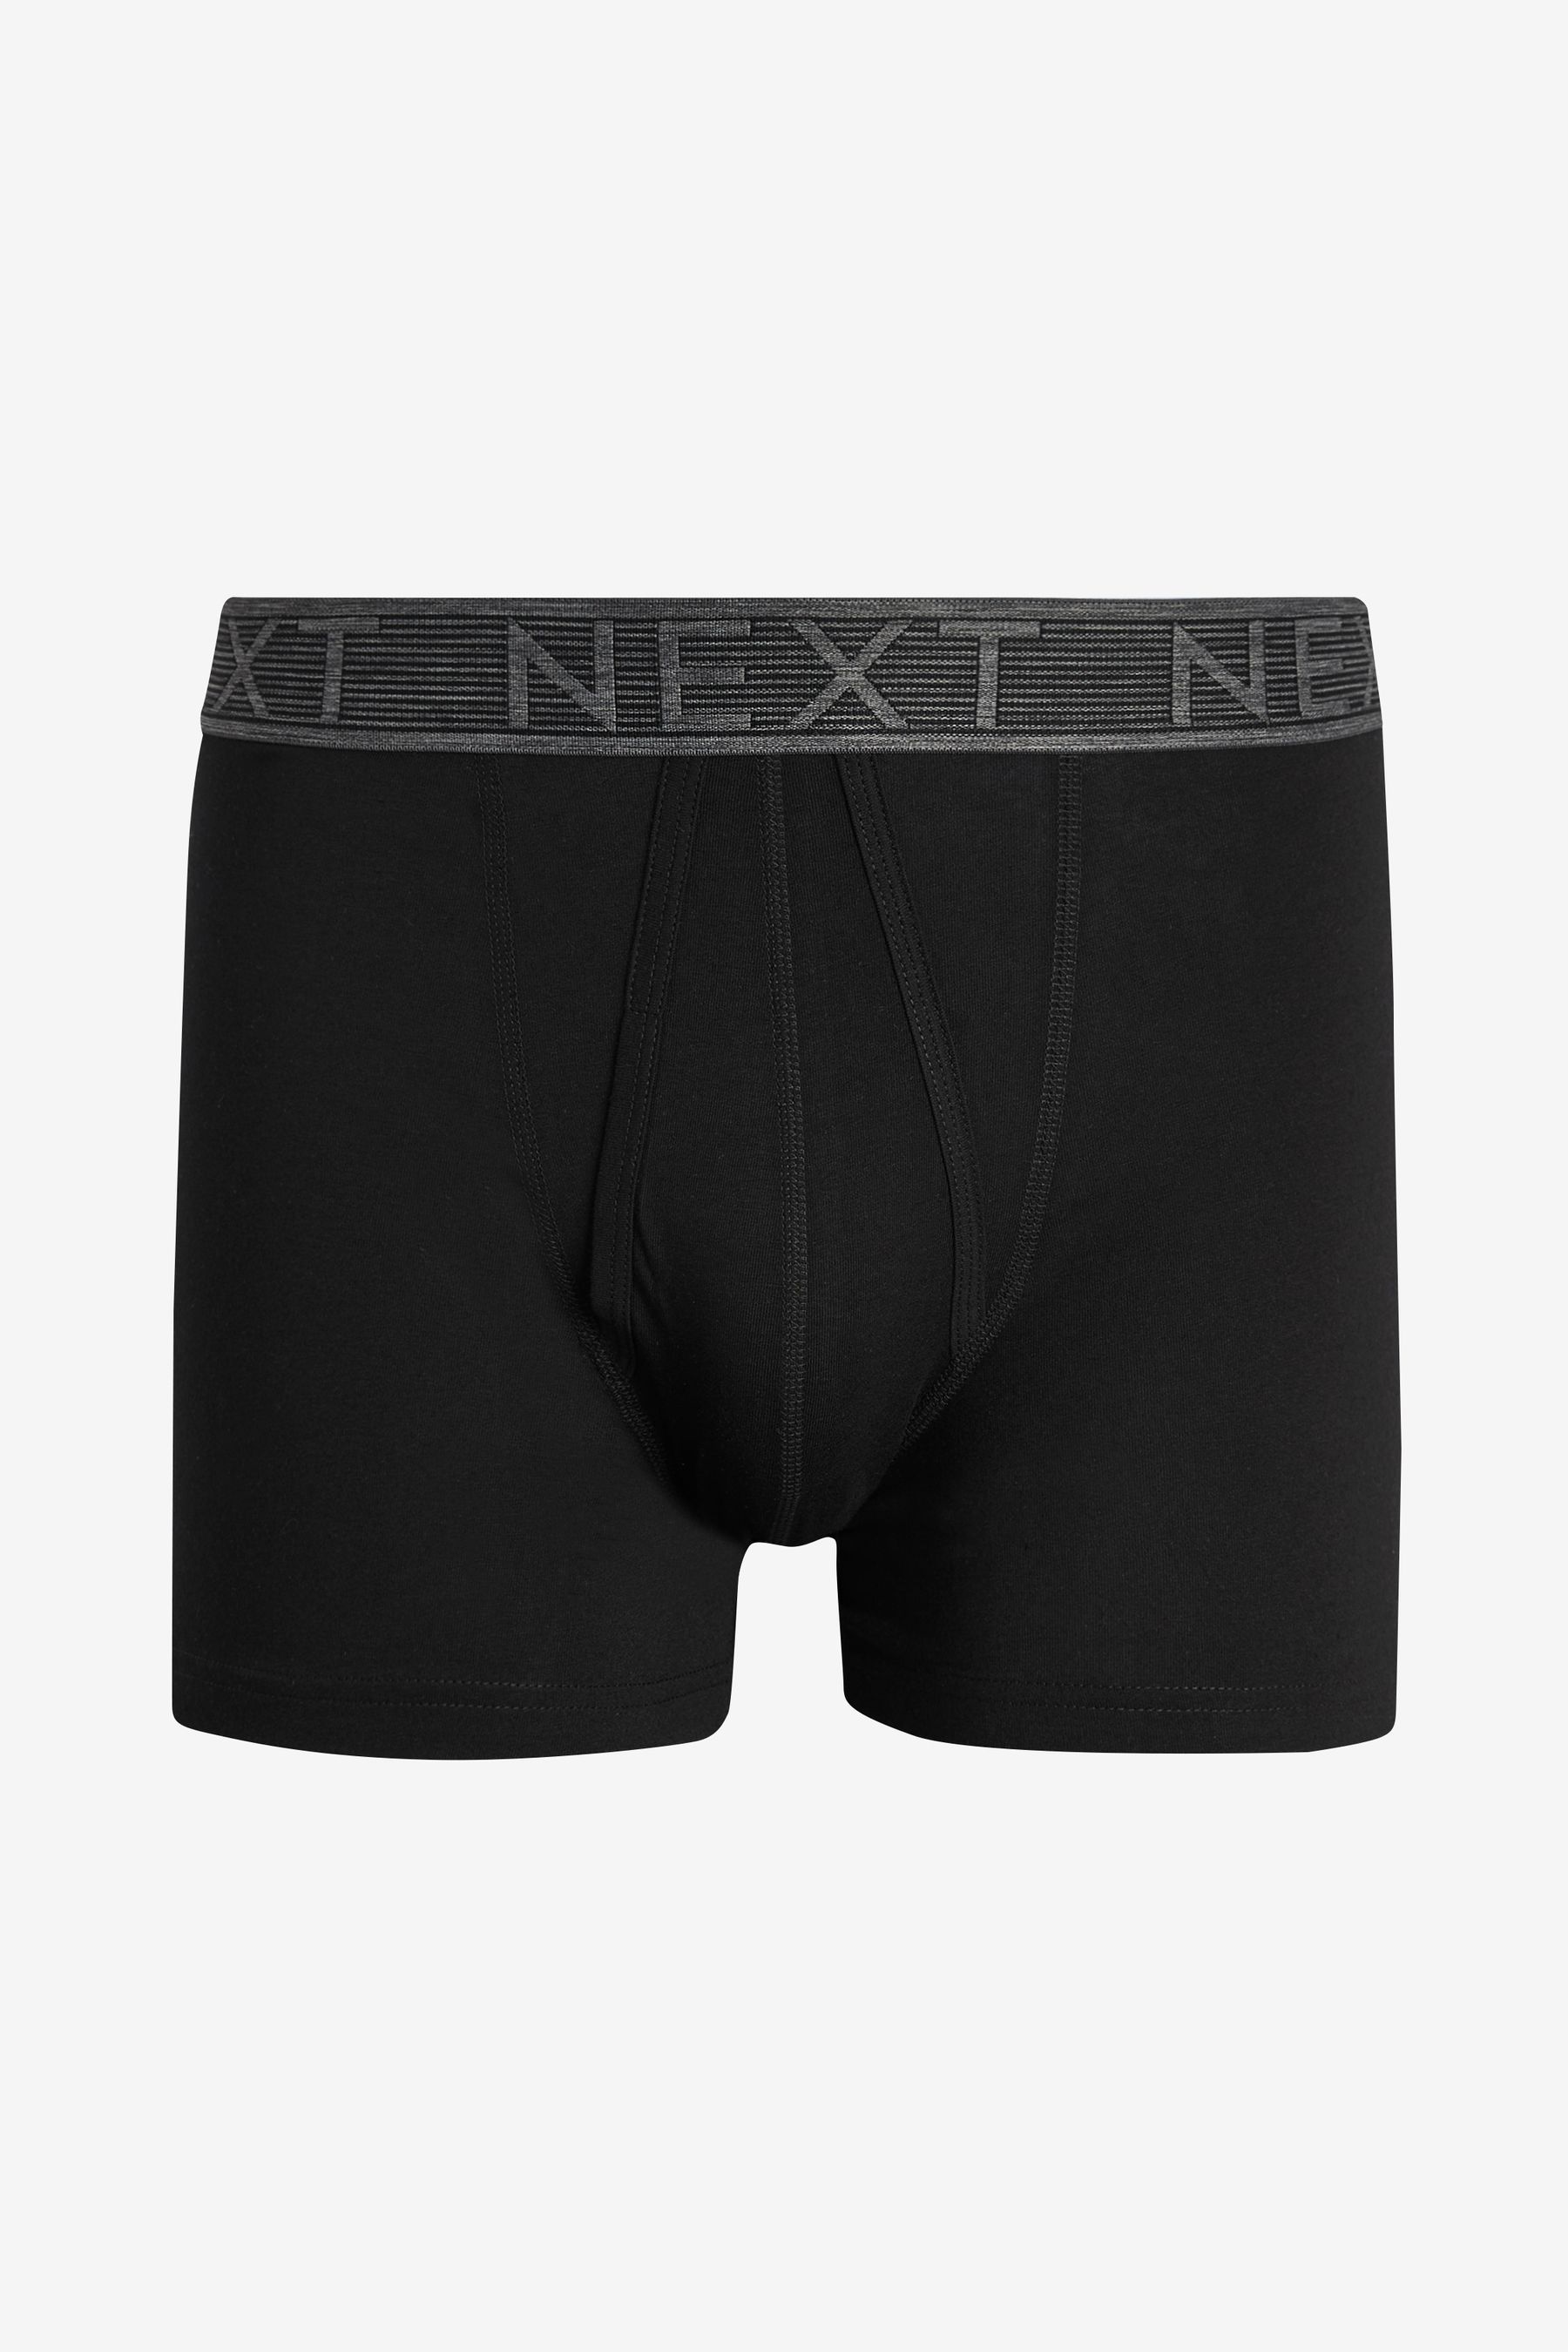 Buy Grey 4 pack A-Front Boxers from the Next UK online shop